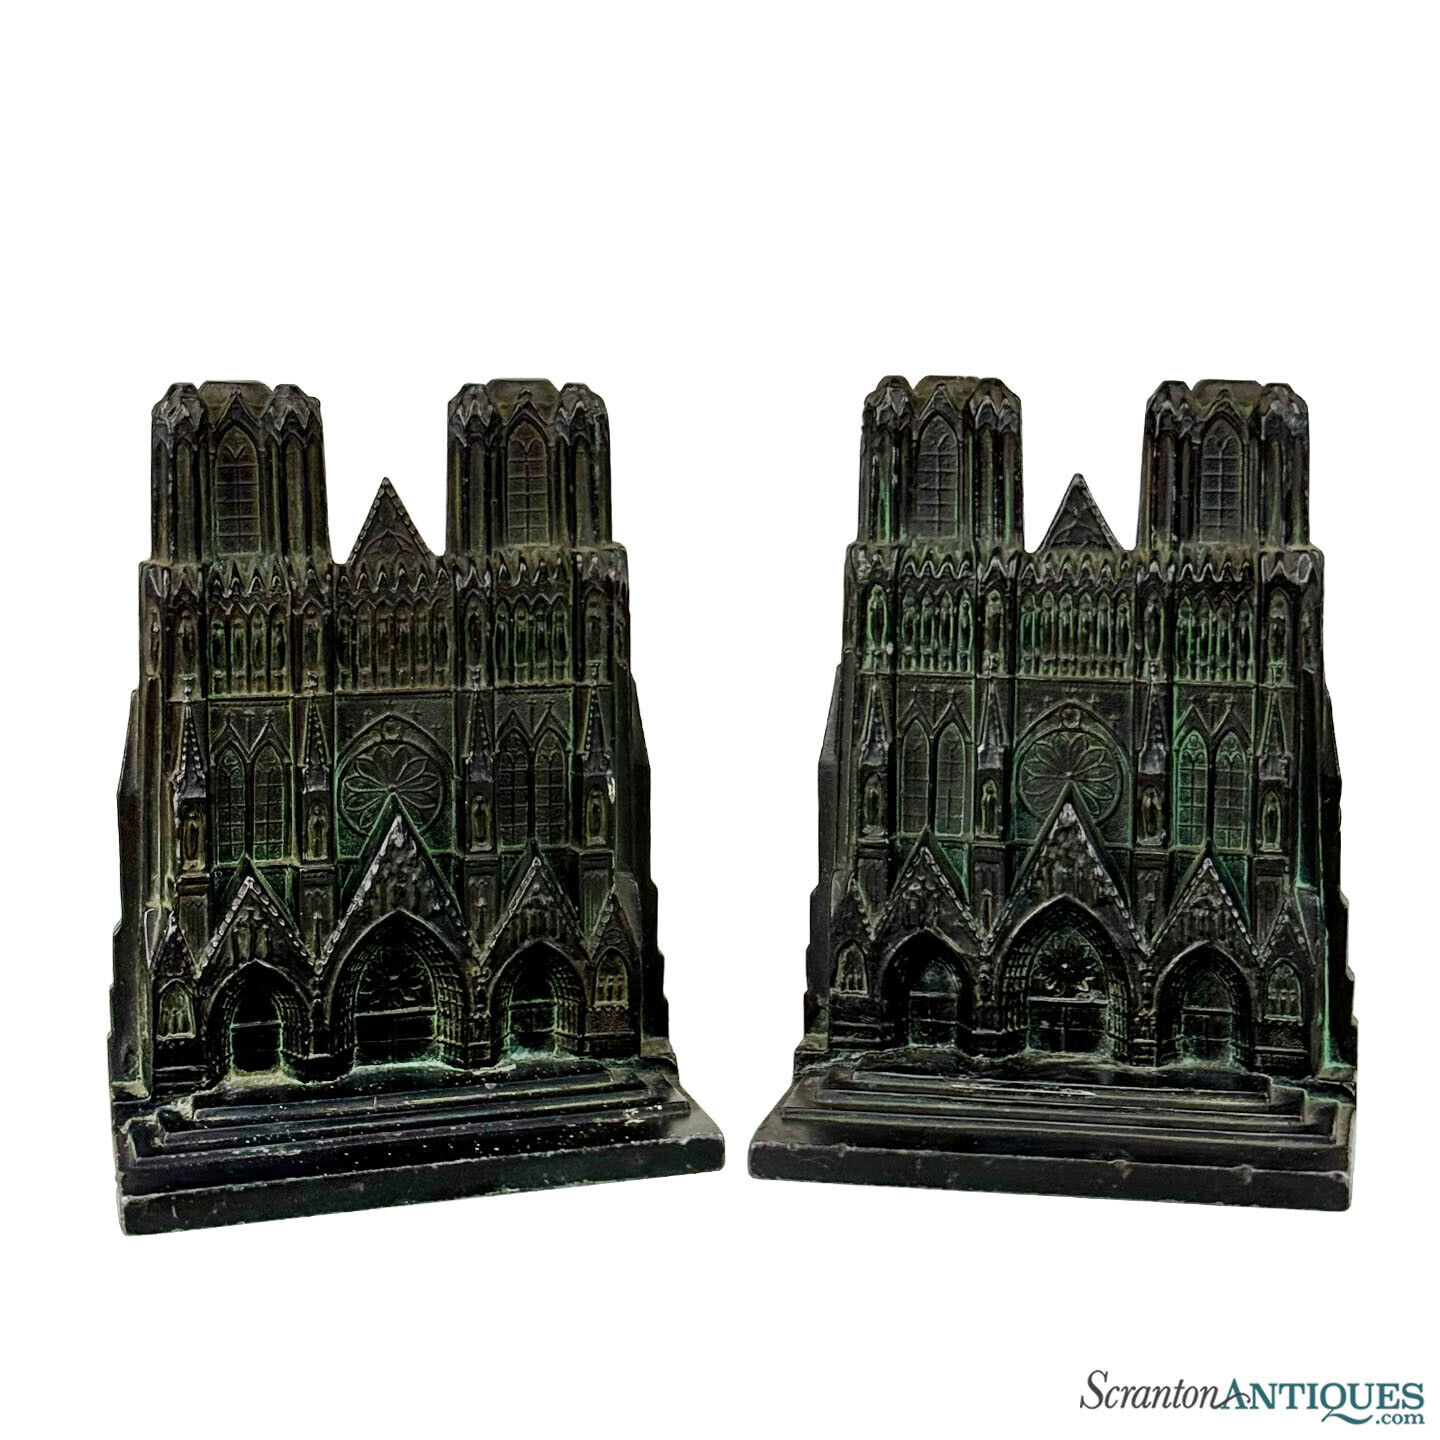 Antique Victorian Gothic Notre Dame Cathedral Library Bookends - A Pair